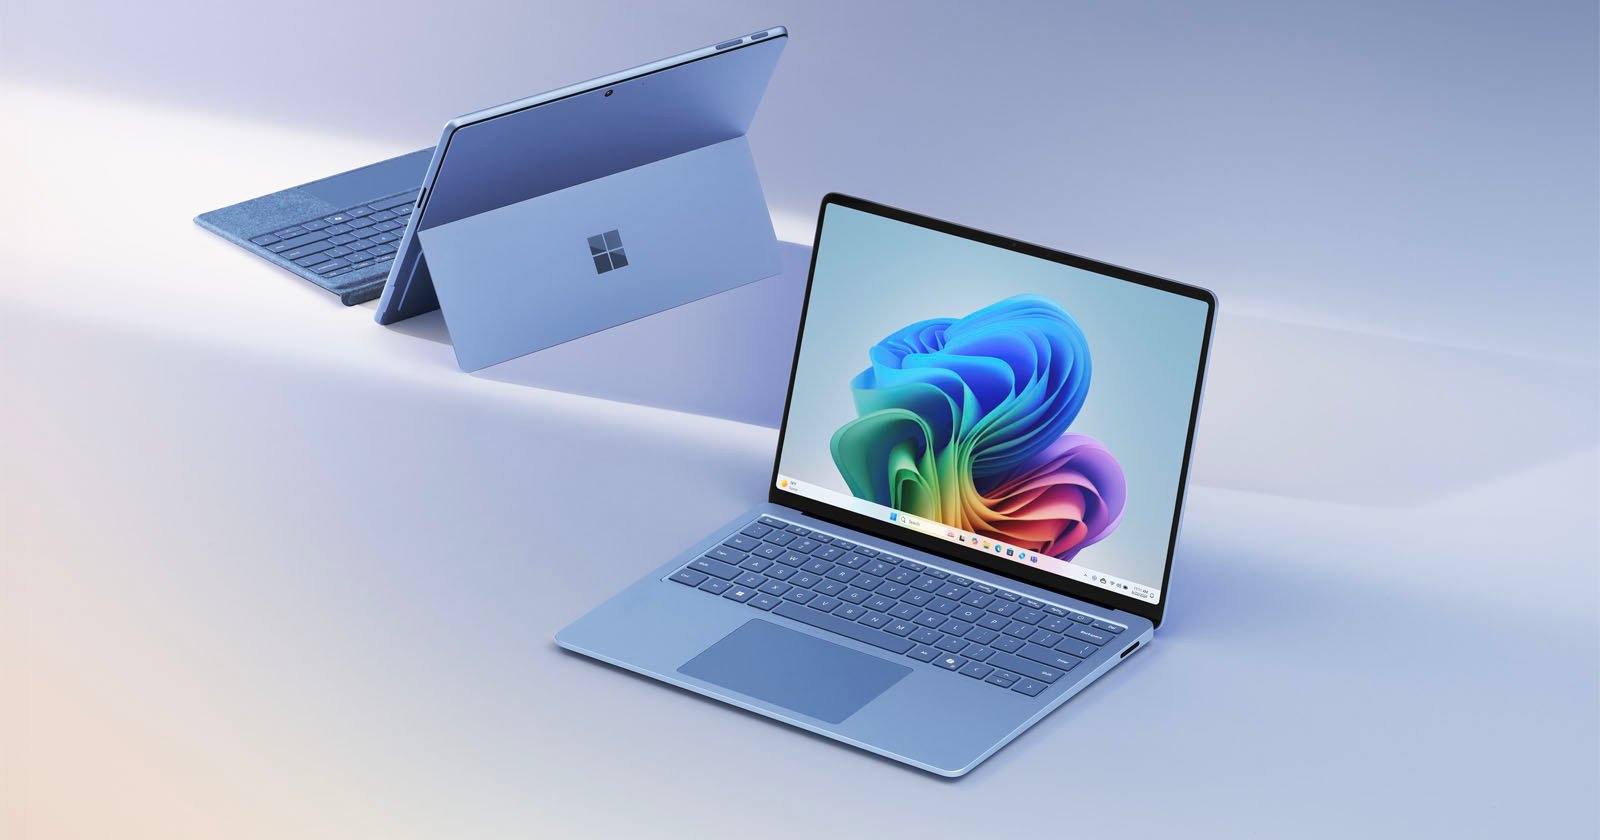 Two Microsoft Surface devices are displayed on a light background. The device in the foreground is a laptop with a colorful screen showing a stylized Windows logo. The one in the background is a tablet with a detachable keyboard, viewed from the back.